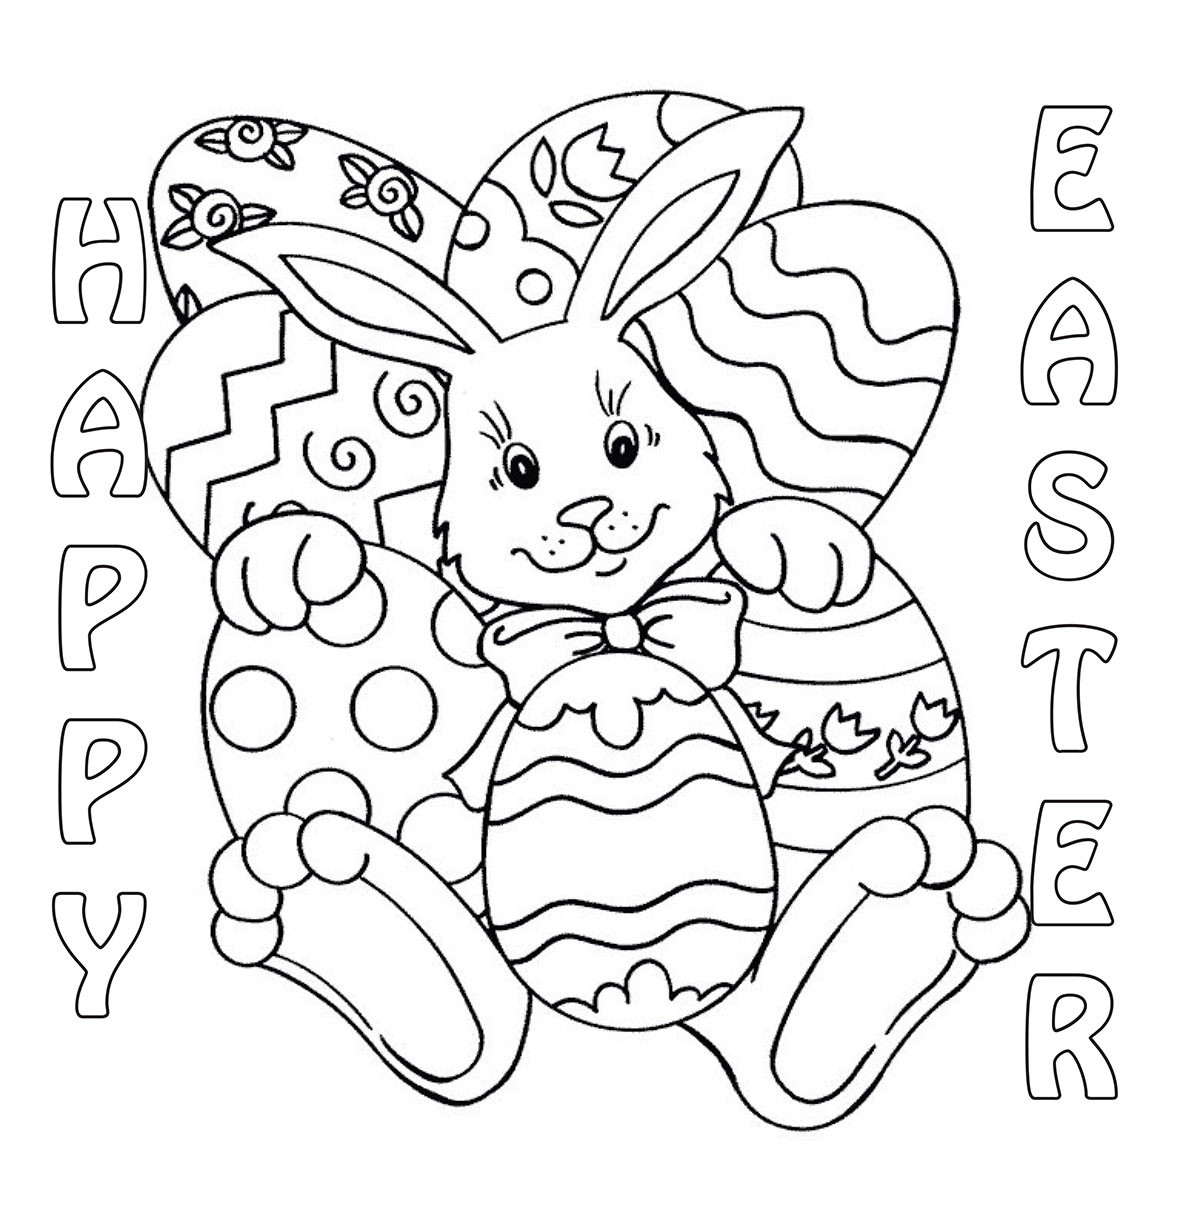 Kids Easter Coloring Pages
 Easter Coloring Contest 2014